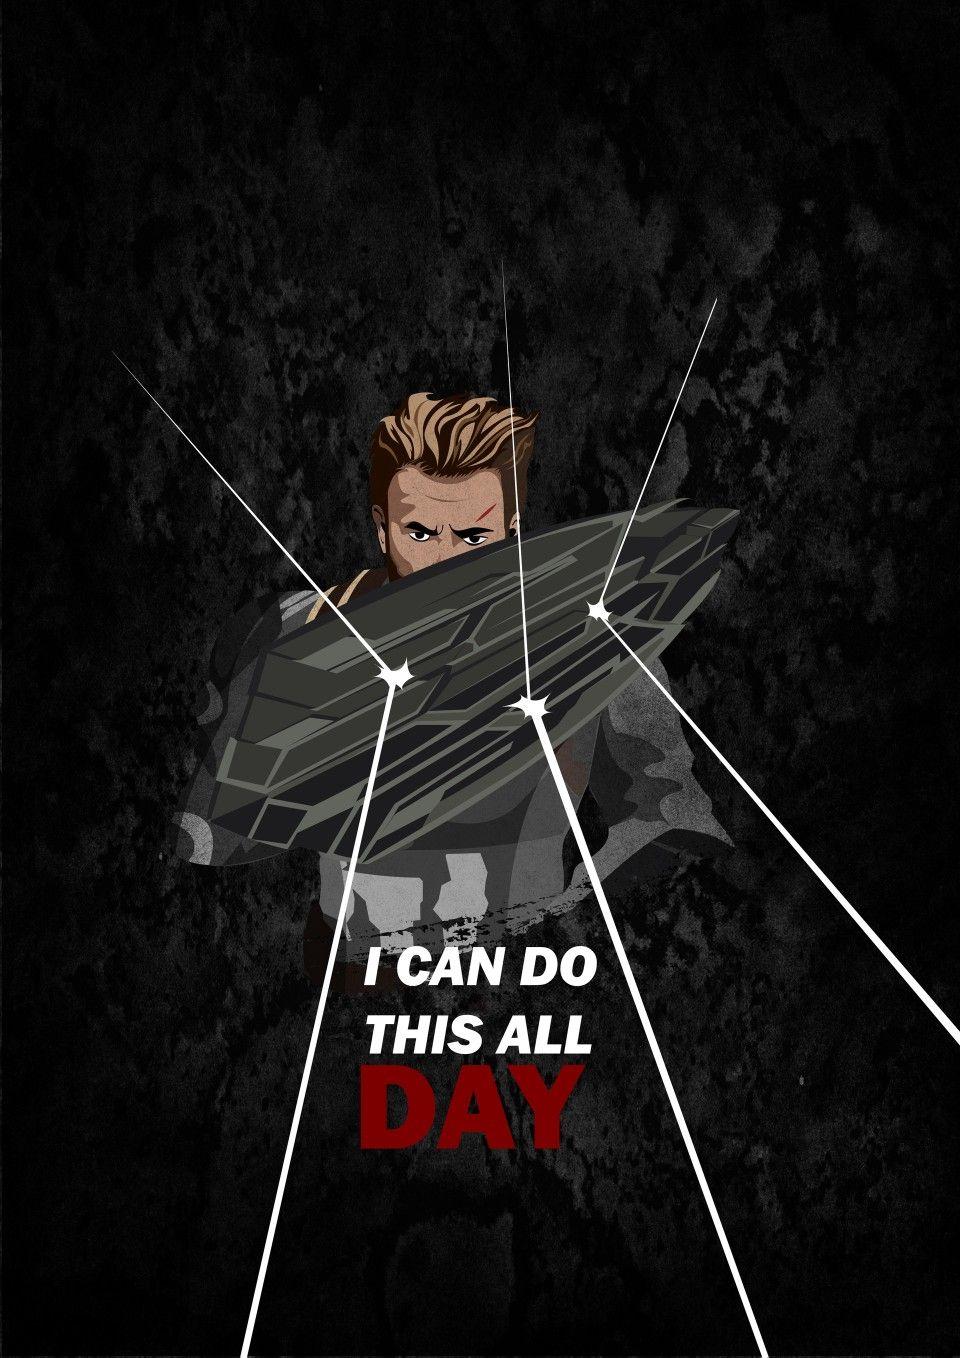 I Can Do This All Day. Captain america wallpaper, Captain